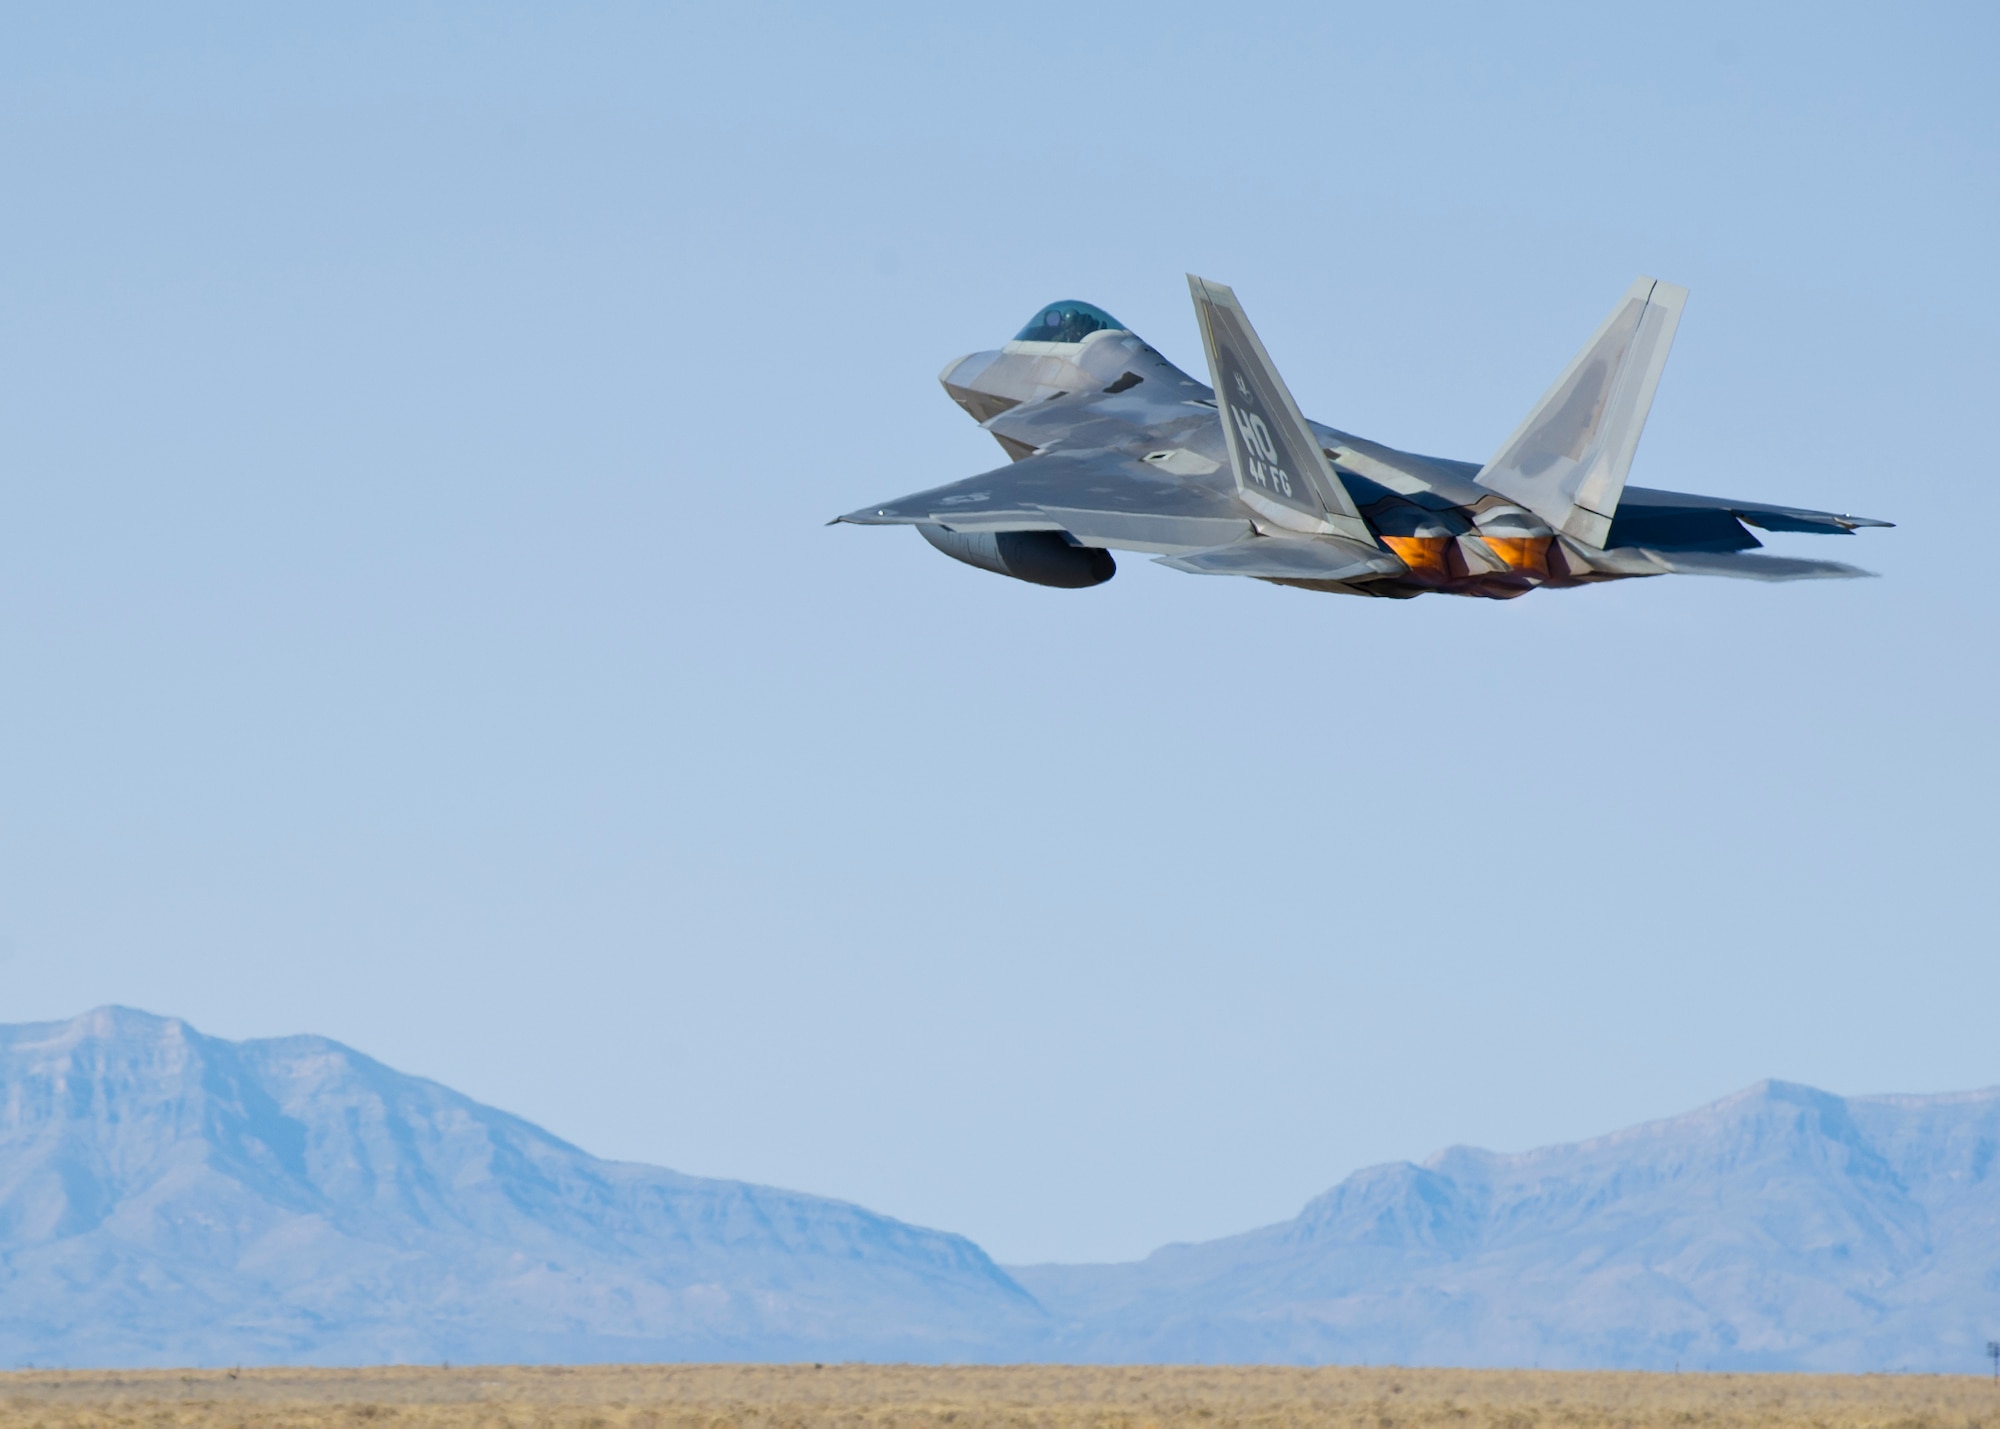 HOLLOMAN AIR FORCE BASE, N.M. – An F-22 Raptor completes its take-off from the runway here Feb. 29.  Airmen across the base work together in an effort to ensure every aircraft is combat ready. (U.S. Air Force photo by Airman 1st Class Daniel E. Liddicoet/Released) 